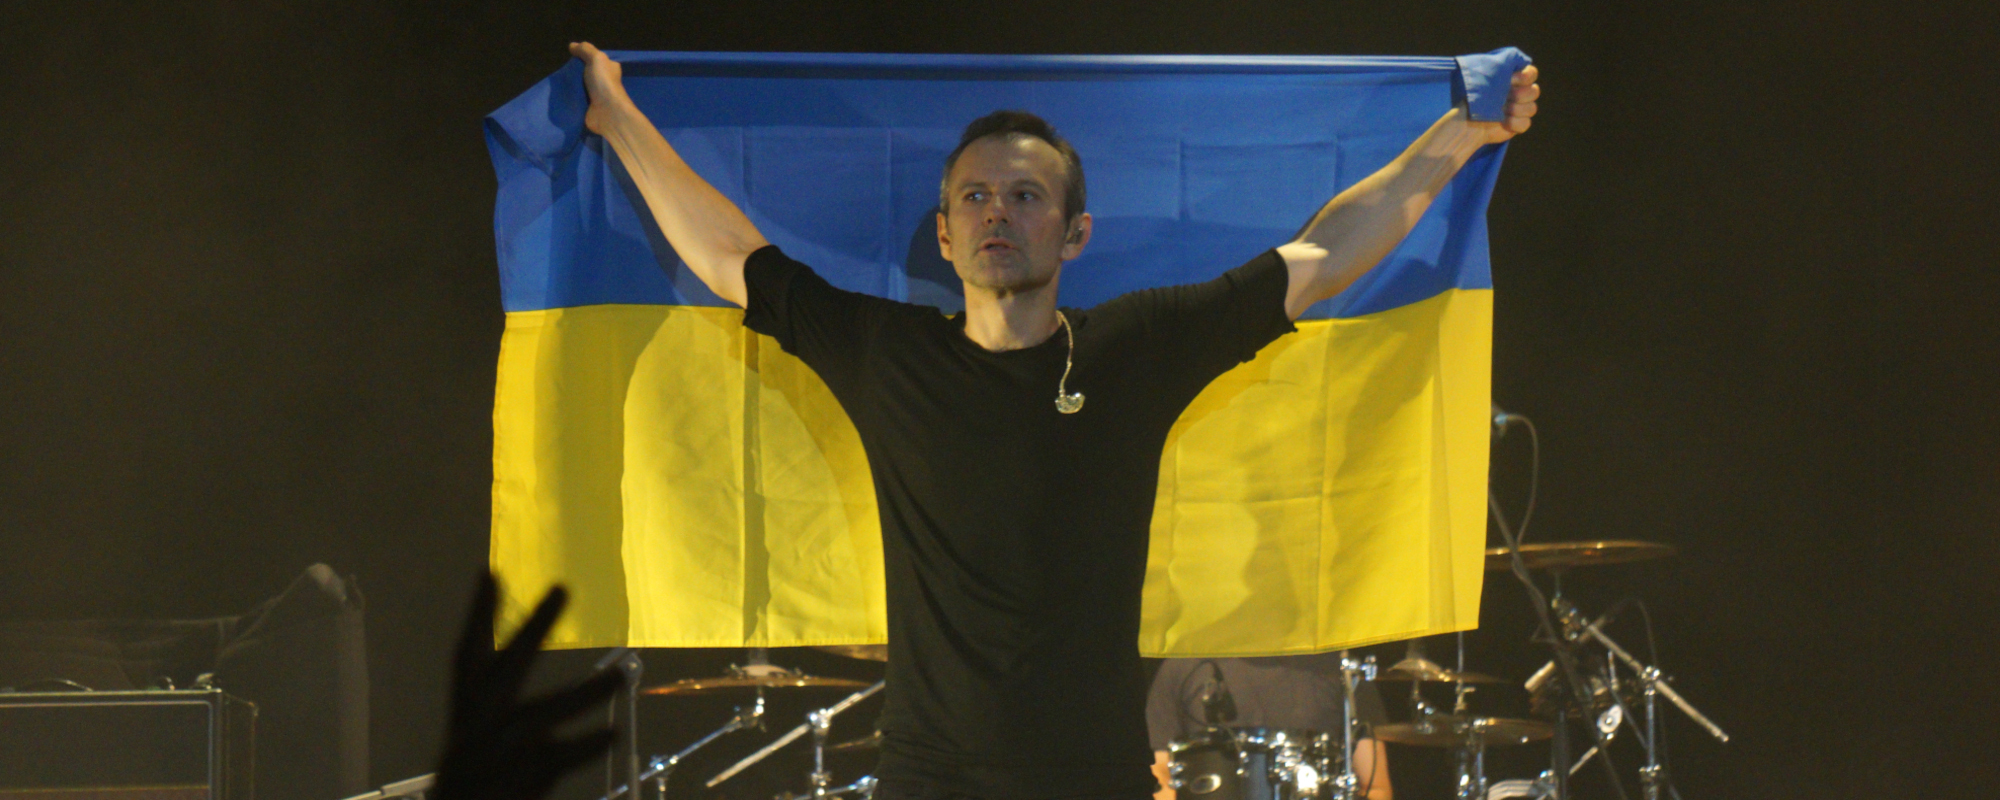 From Rockstar to Lieutenant in Ukraine’s Army: Svyatoslav Vakarchuk Asks for Help in the Fight Against Russian Invasion